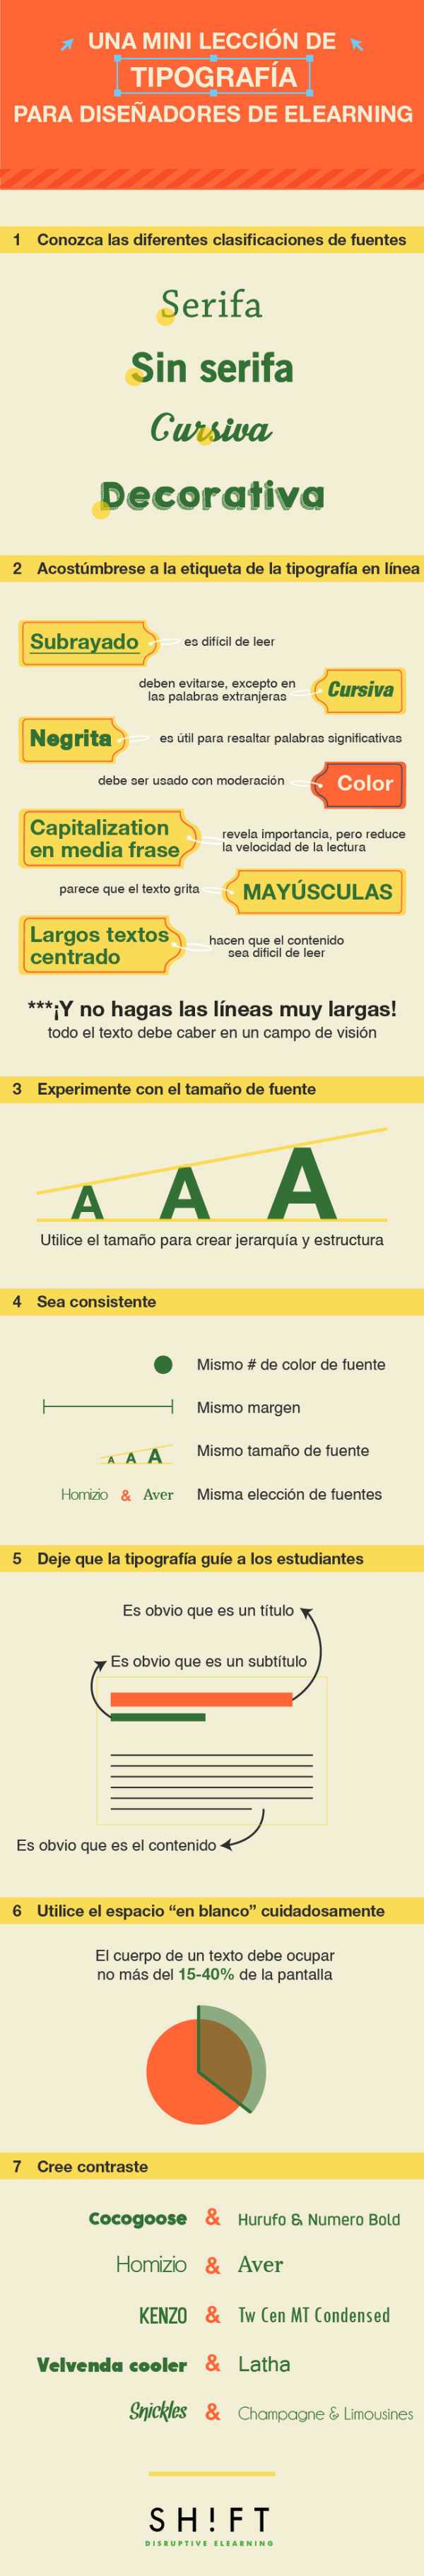 ESPANOL A 7 Step Typography Lesson for First time eLearning Developers v2 01 resized 600